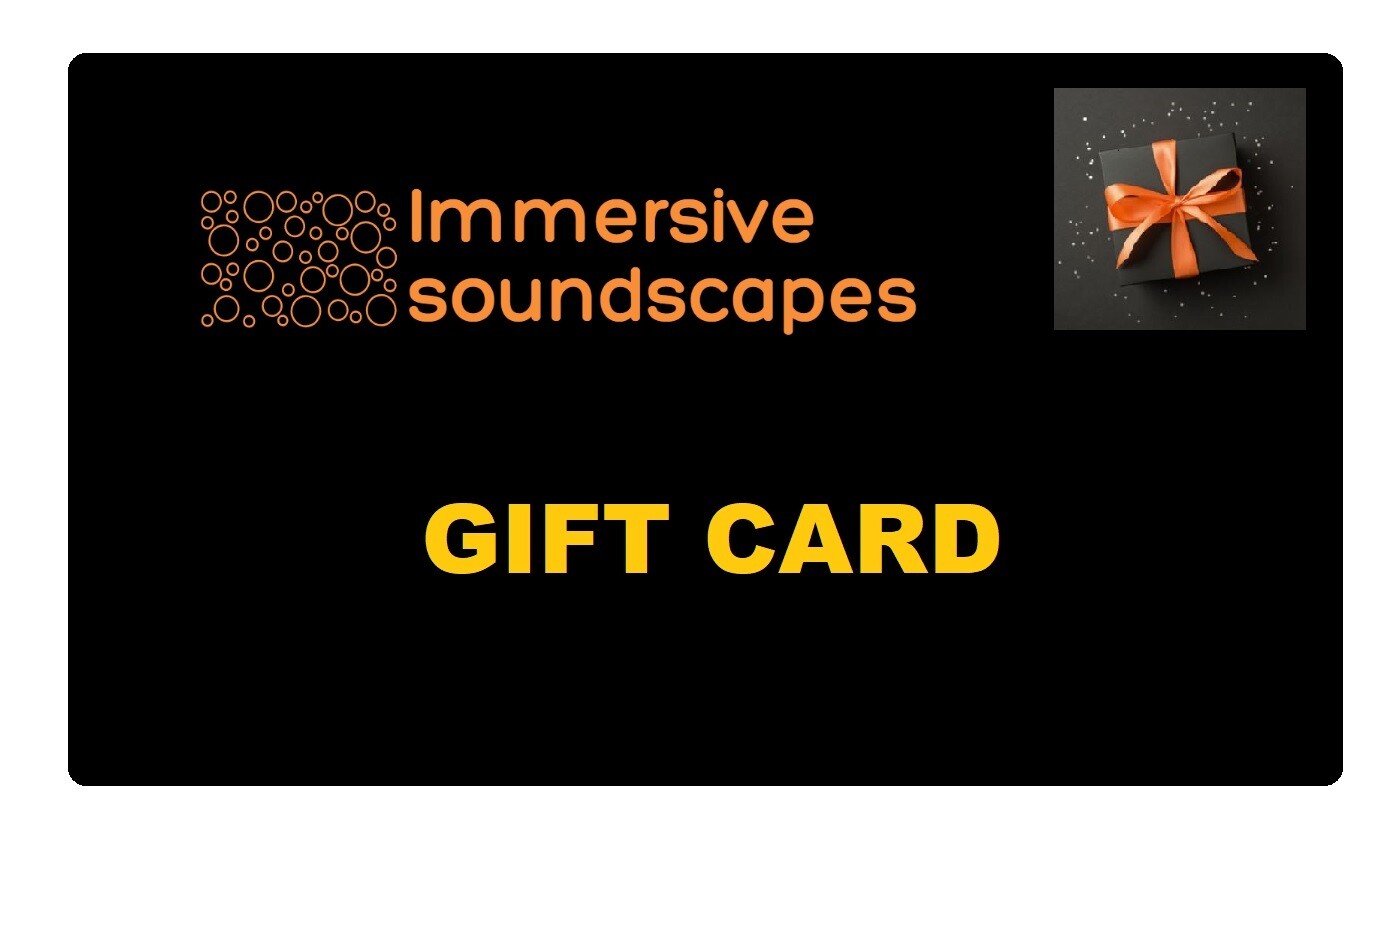 Gift card for Earsight microphones